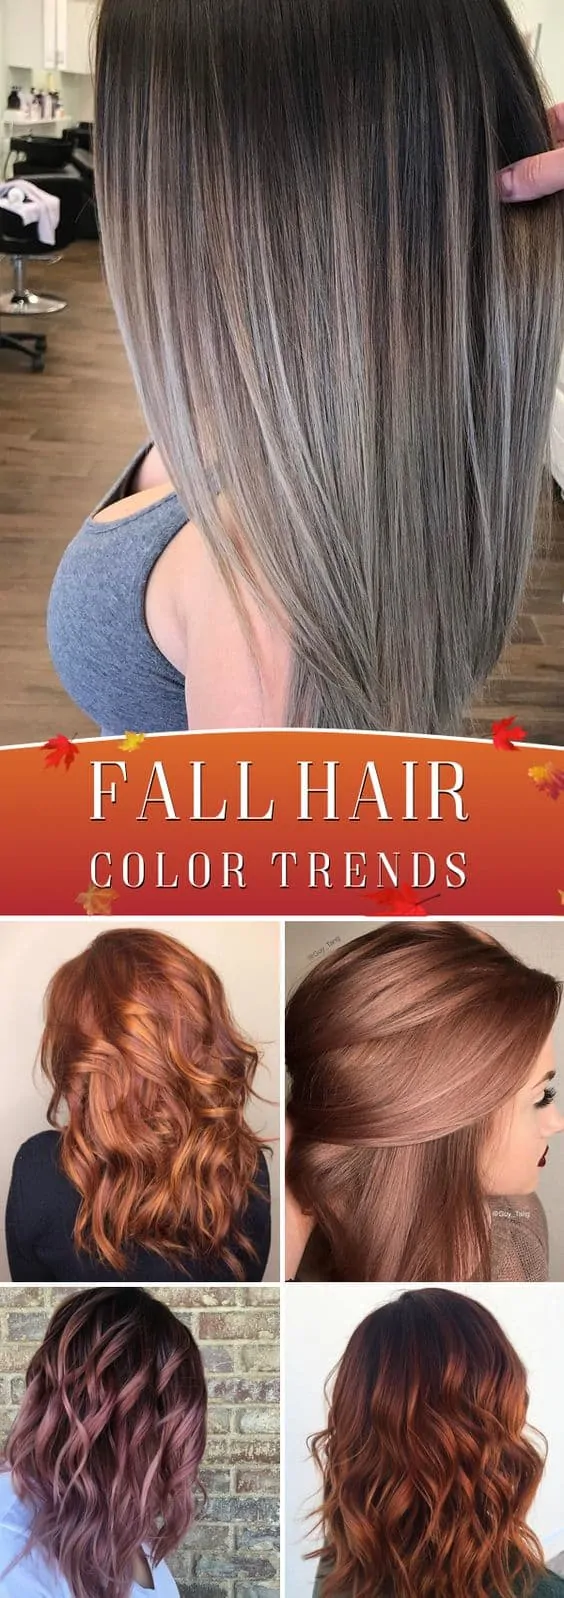 Hair Color Trends for Fall